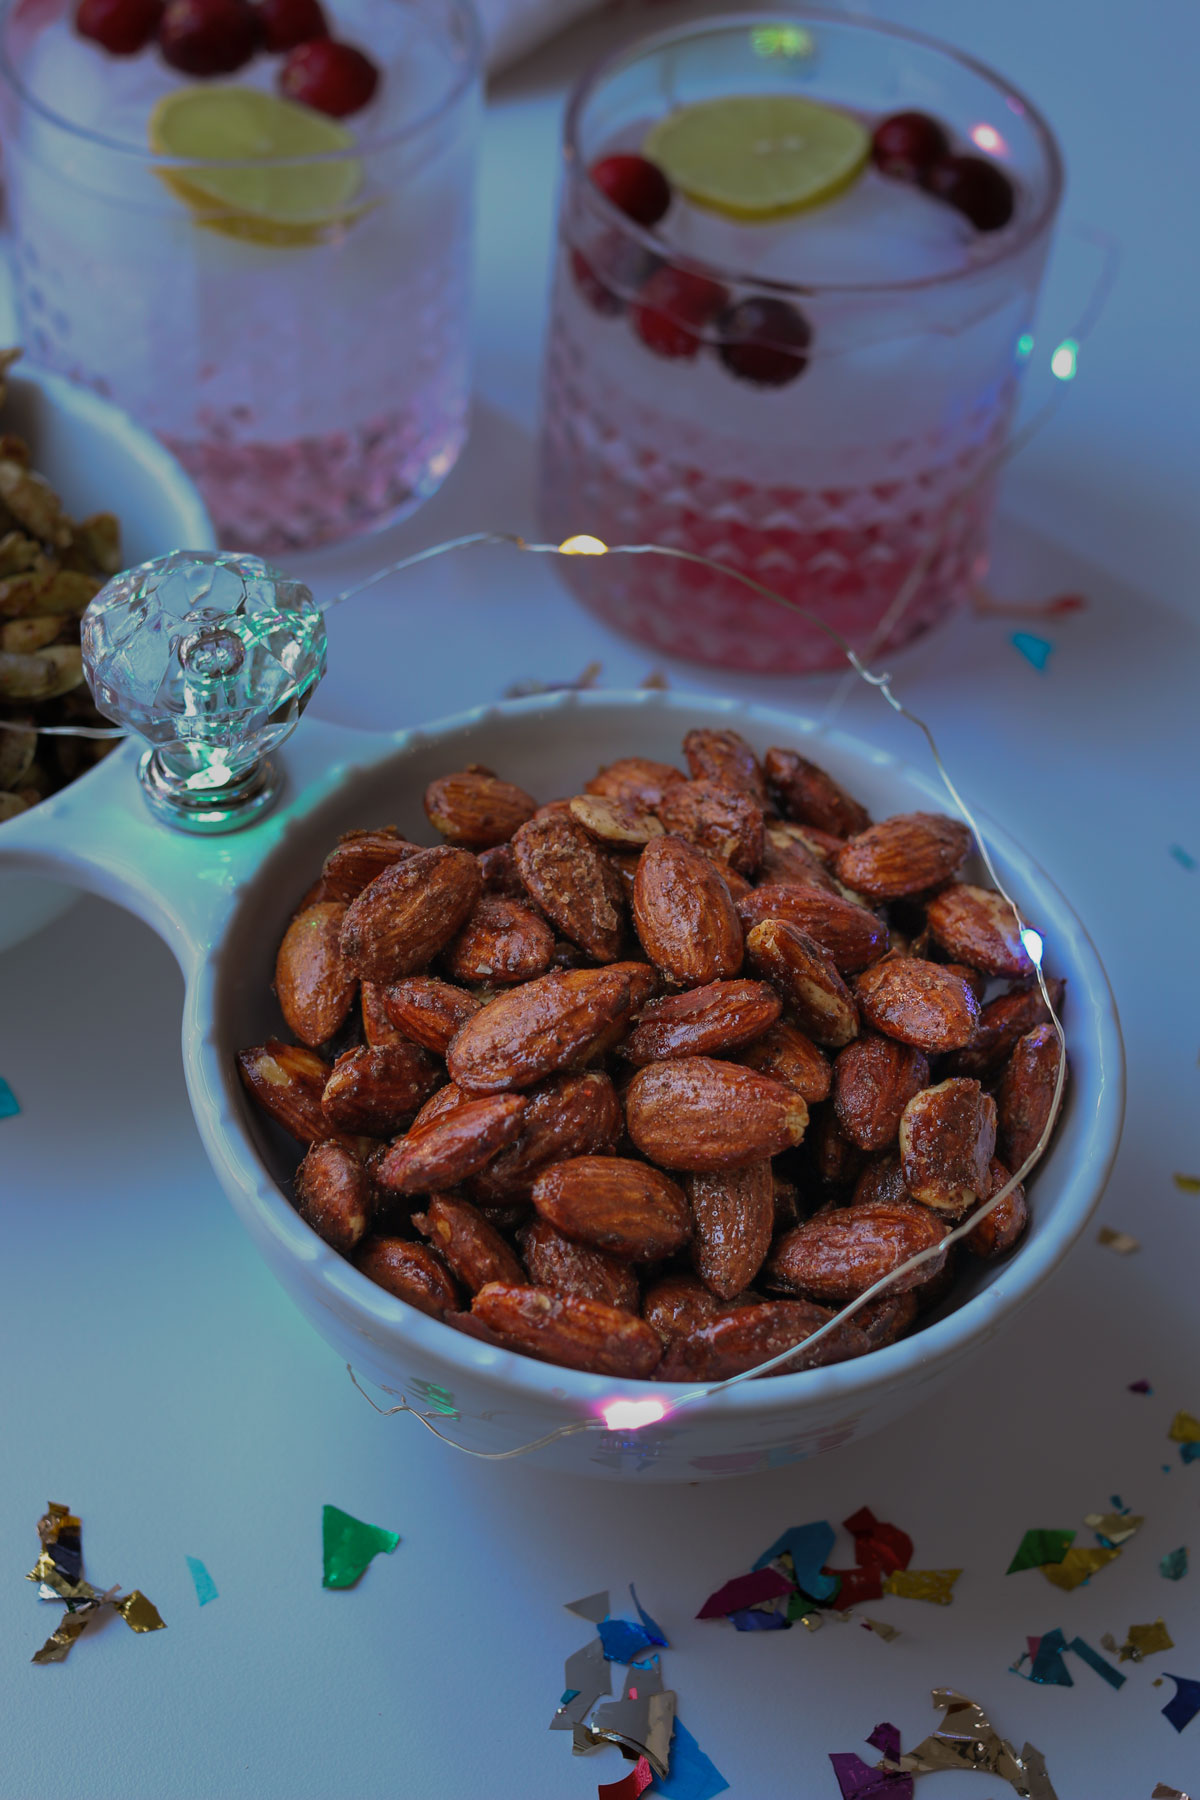 bowl of candied almonds on table with cocktails and confetti.